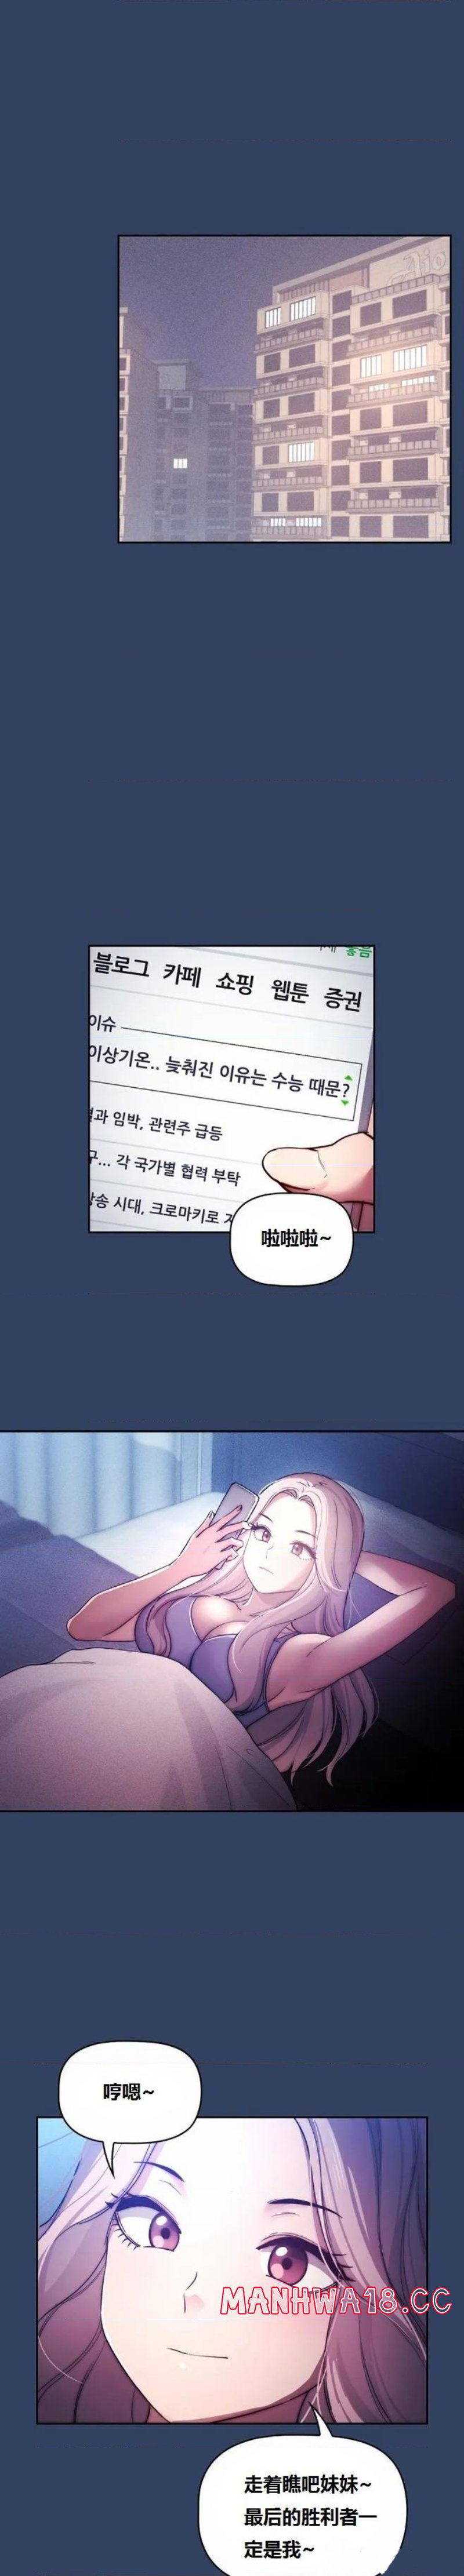 private-tutoring-in-pandemic-raw-chap-38-0